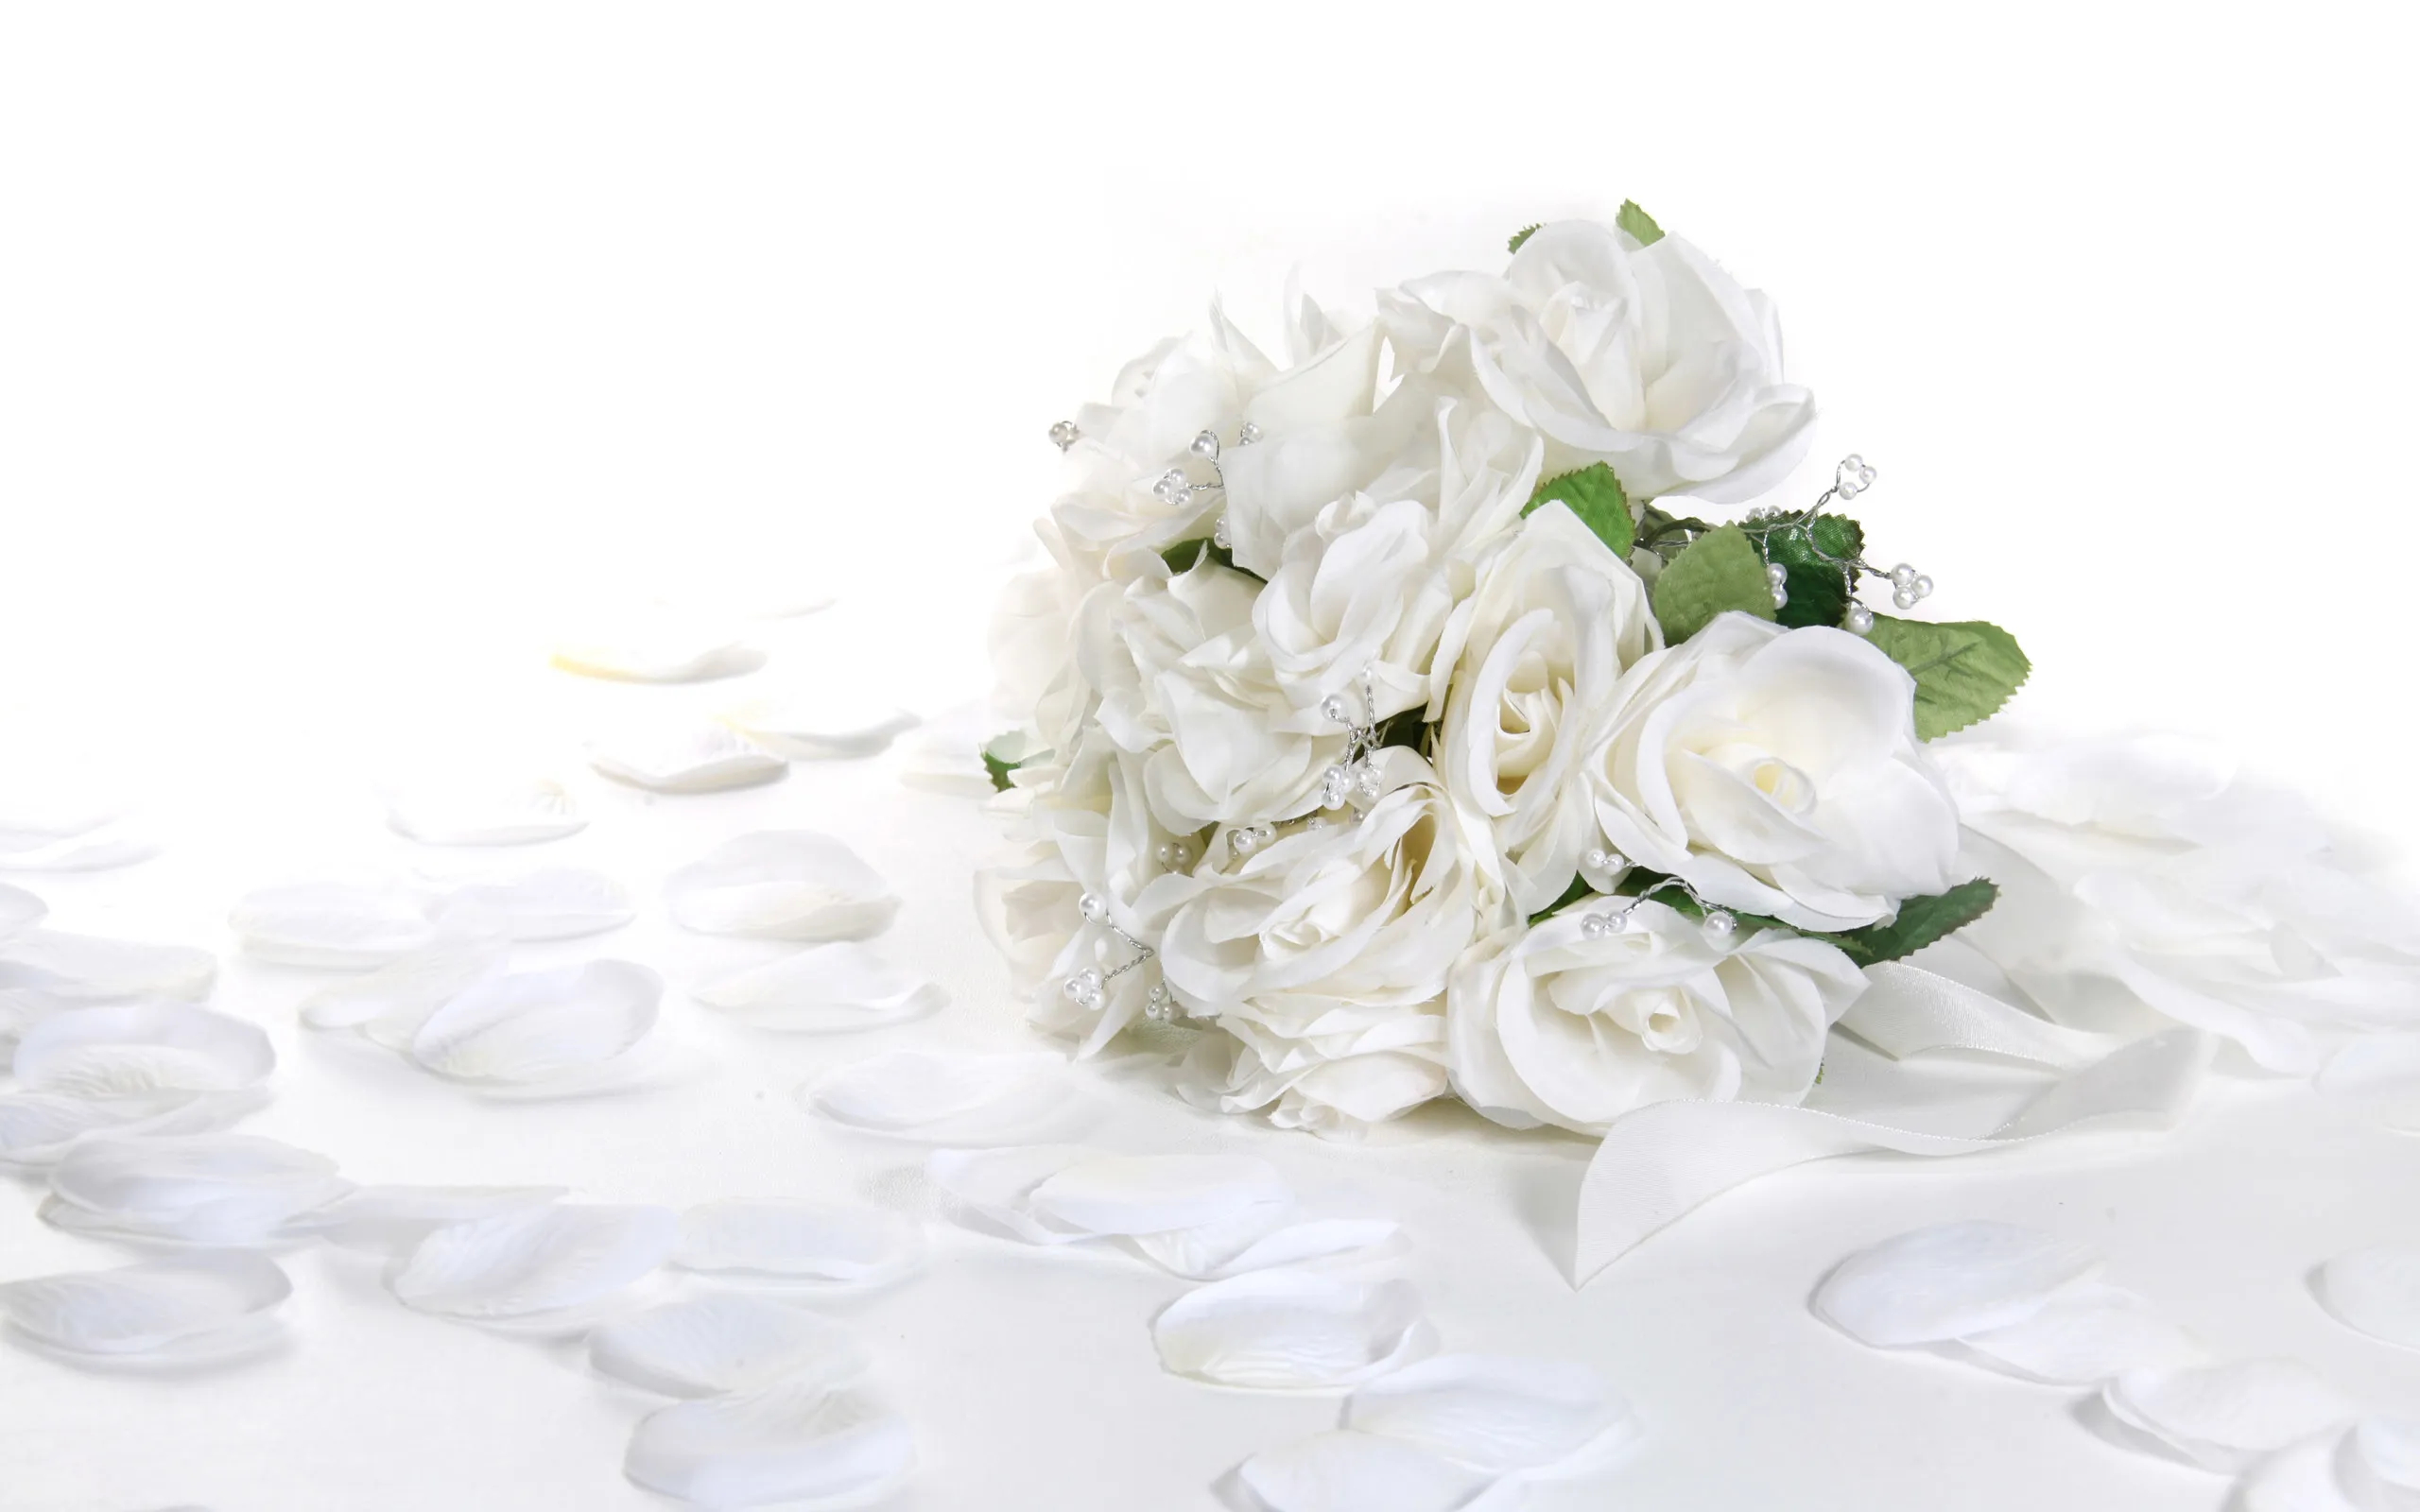 2560x1600 Background For Wedding Images